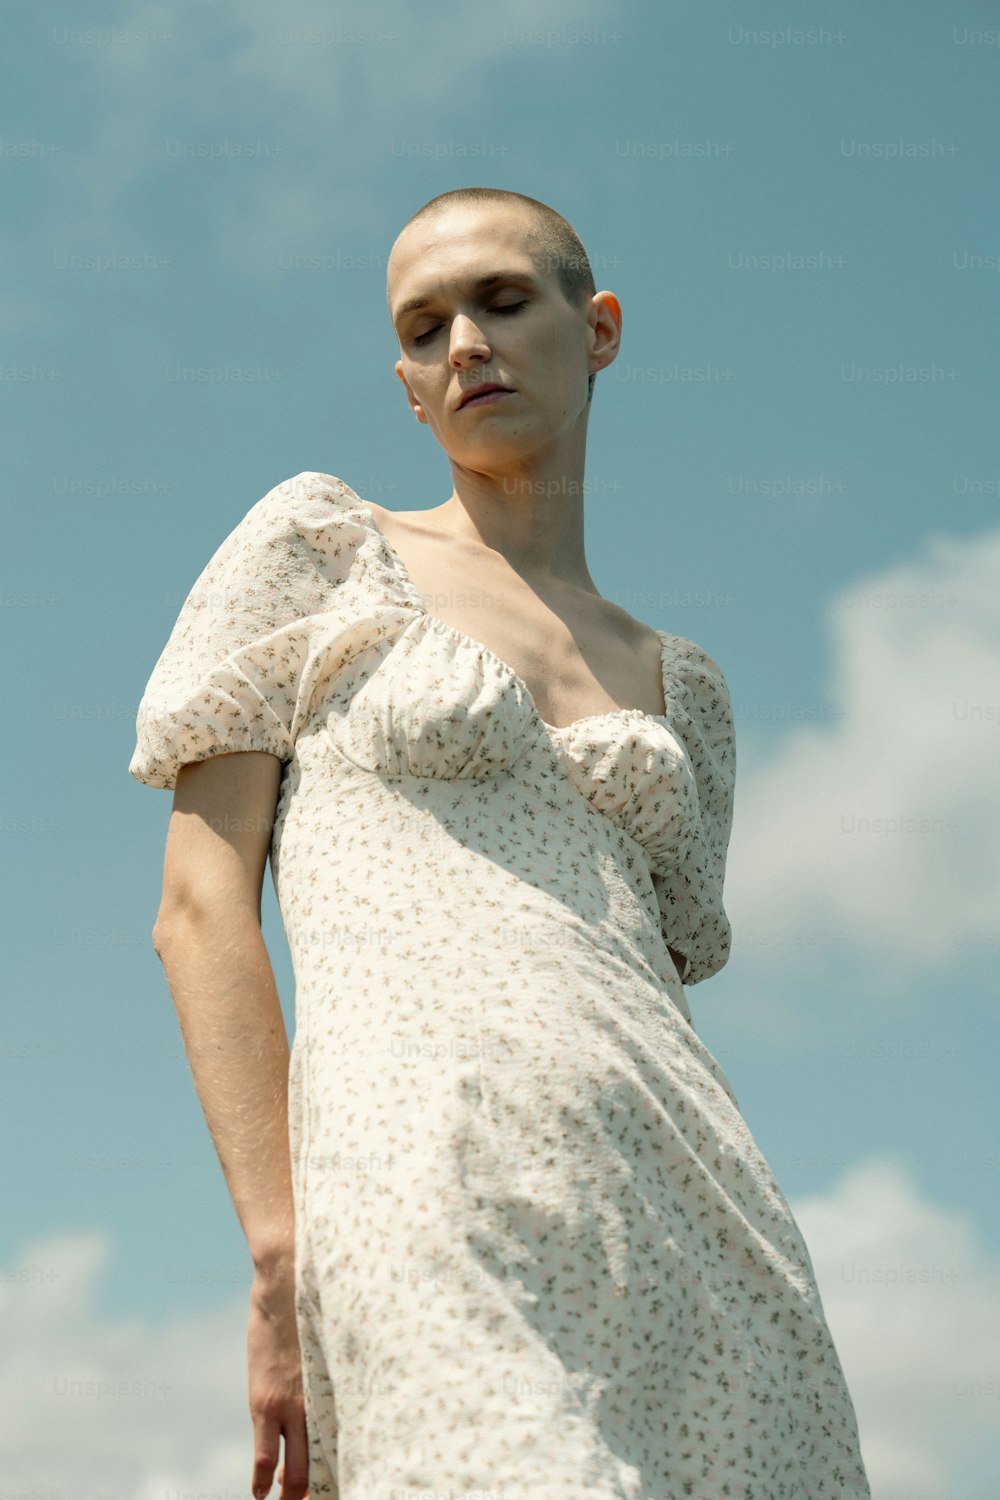 a woman in a white dress with a bald head